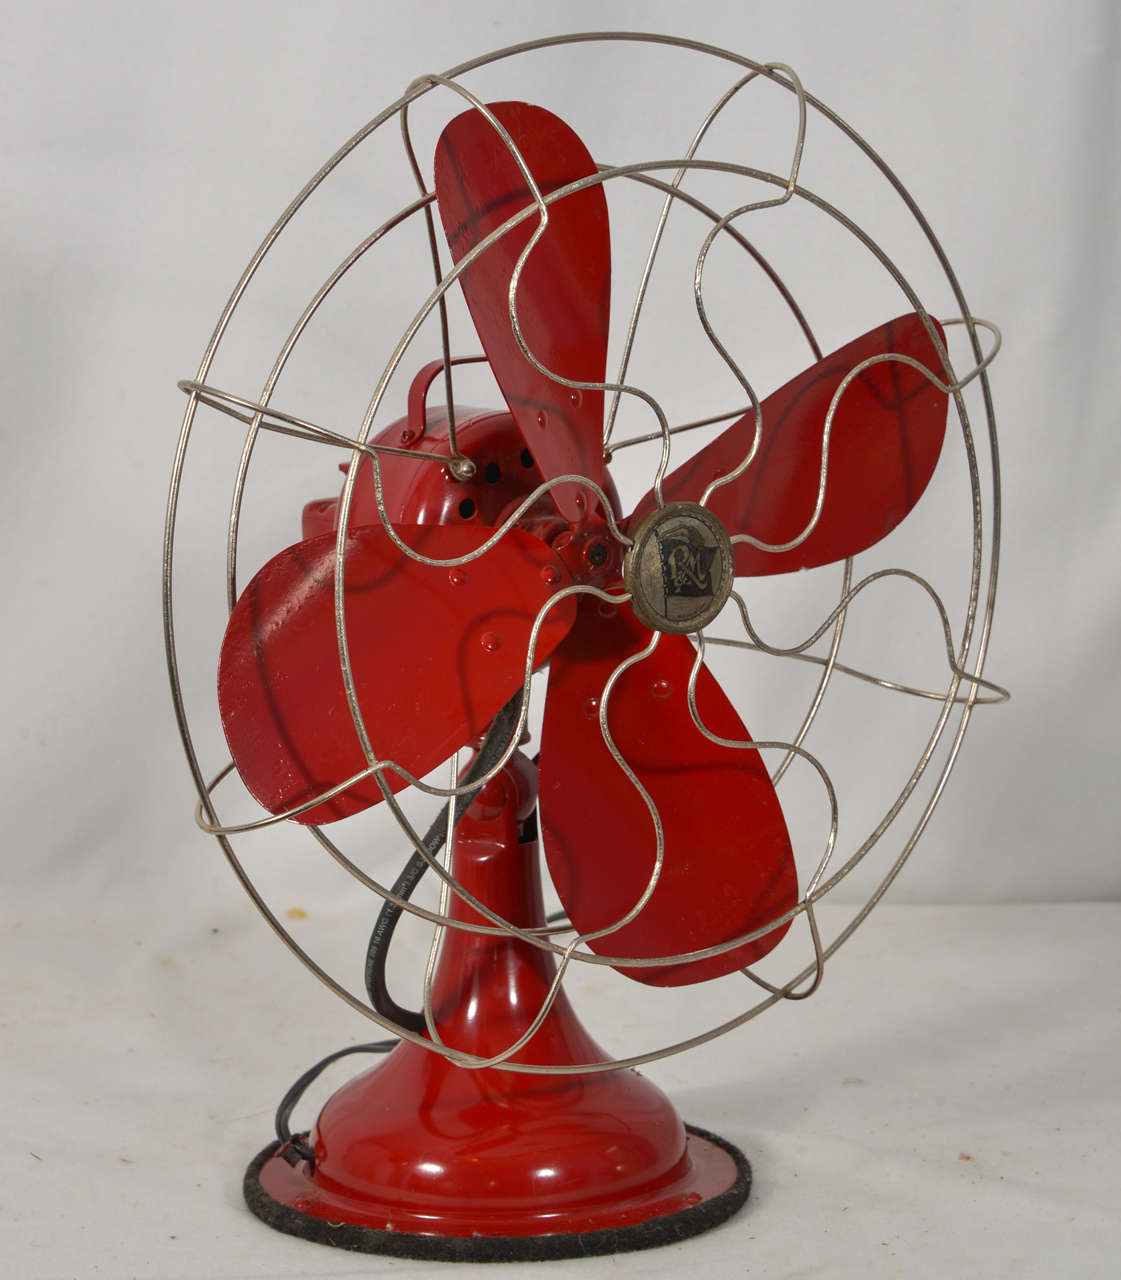 1930s Robbins and Myers Table Fan, refurbished and painted Red. Three speed Hi/Med/Lo Speed. Oscillates. 16